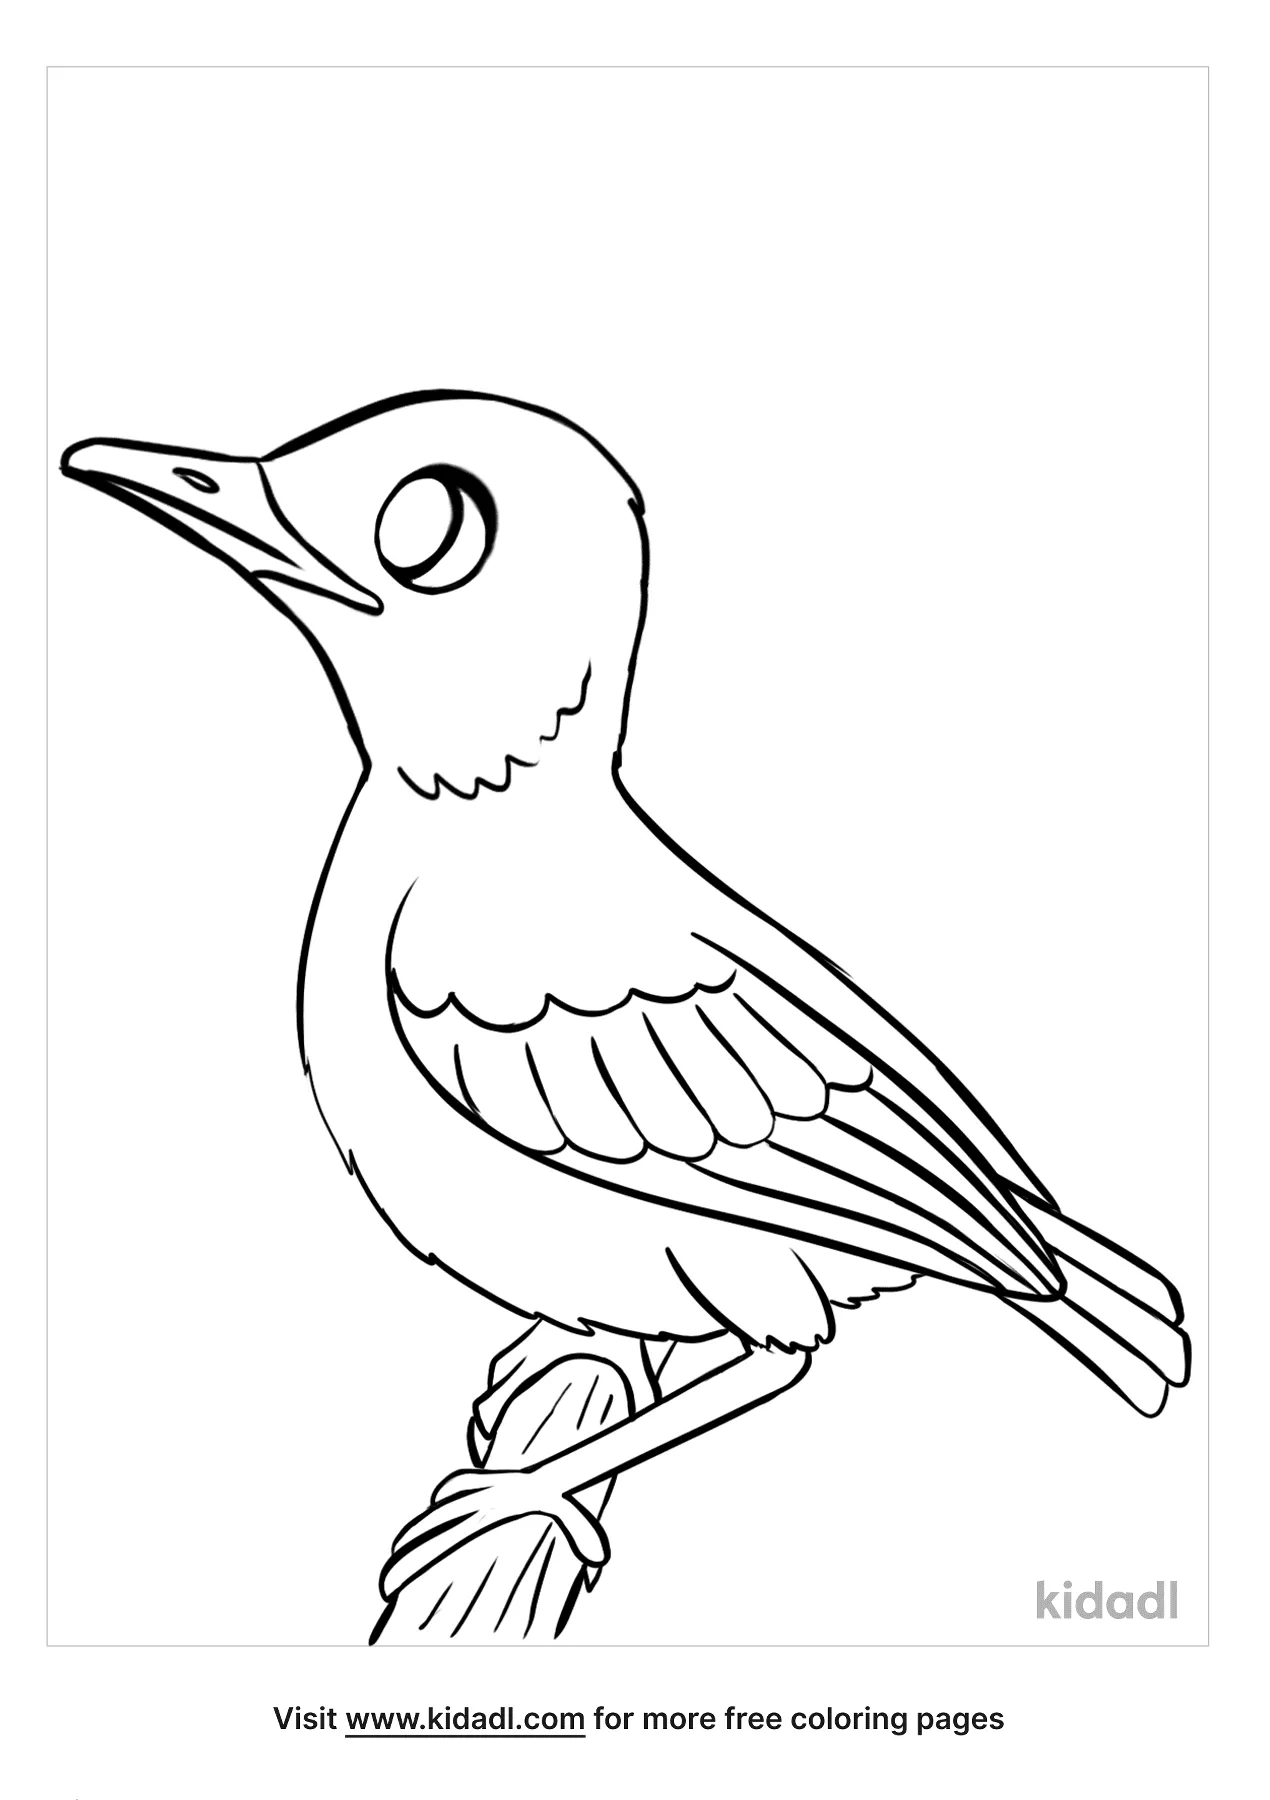 Baby Bird Coloring Pages   Free Birds Coloring Pages   Kidadl